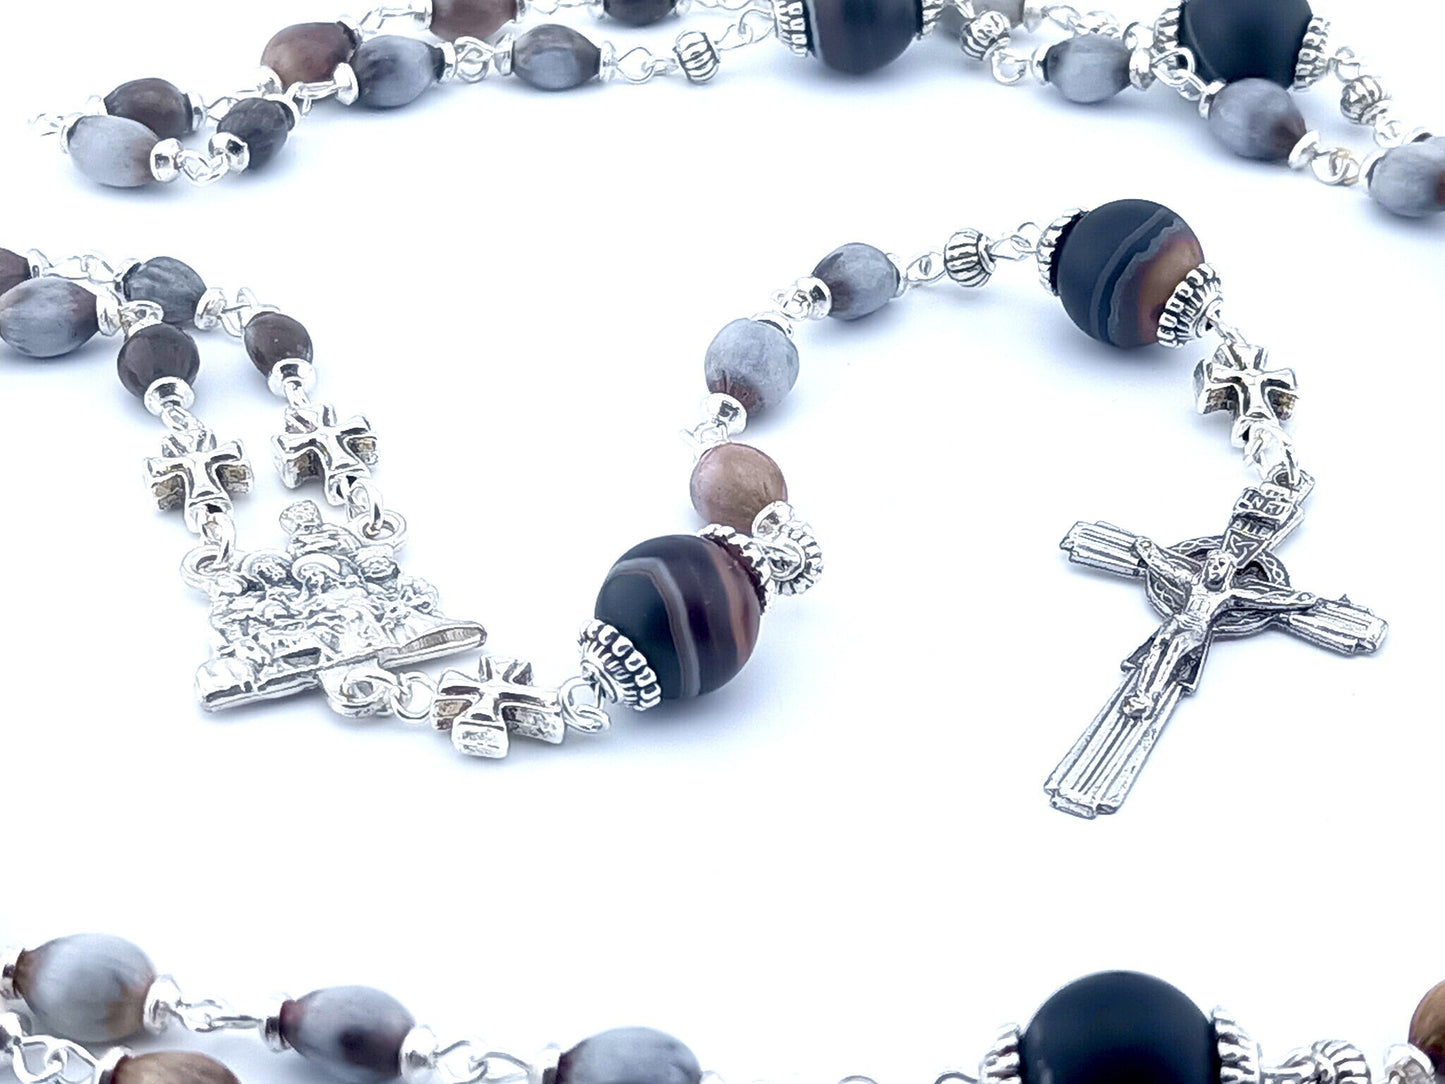 The Nativity unique rosary beads with Job's tears beads, silver crucifix and Nativity centre medal and large agate gemstone pater beads.